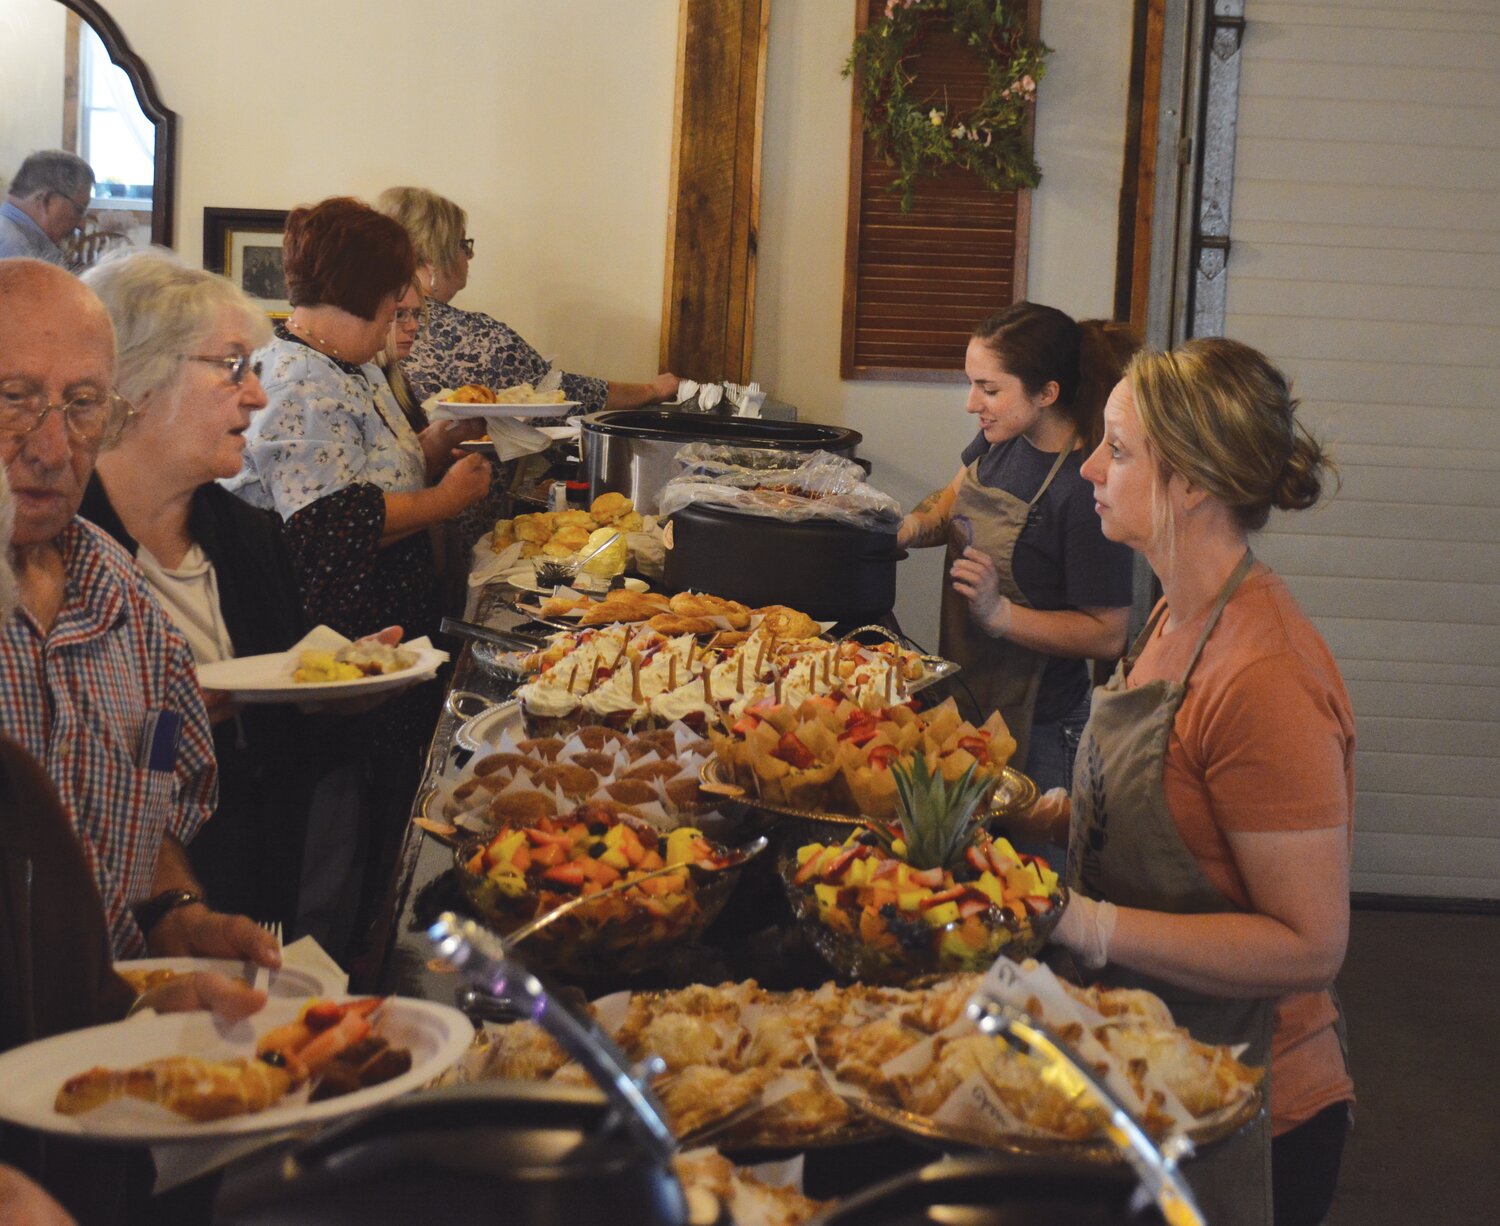 Attendees at the Thursday, May 4, National Day of Prayer Breakfast enjoyed a bountiful breakfast spread provided by Betty Jane’s Kitchen.